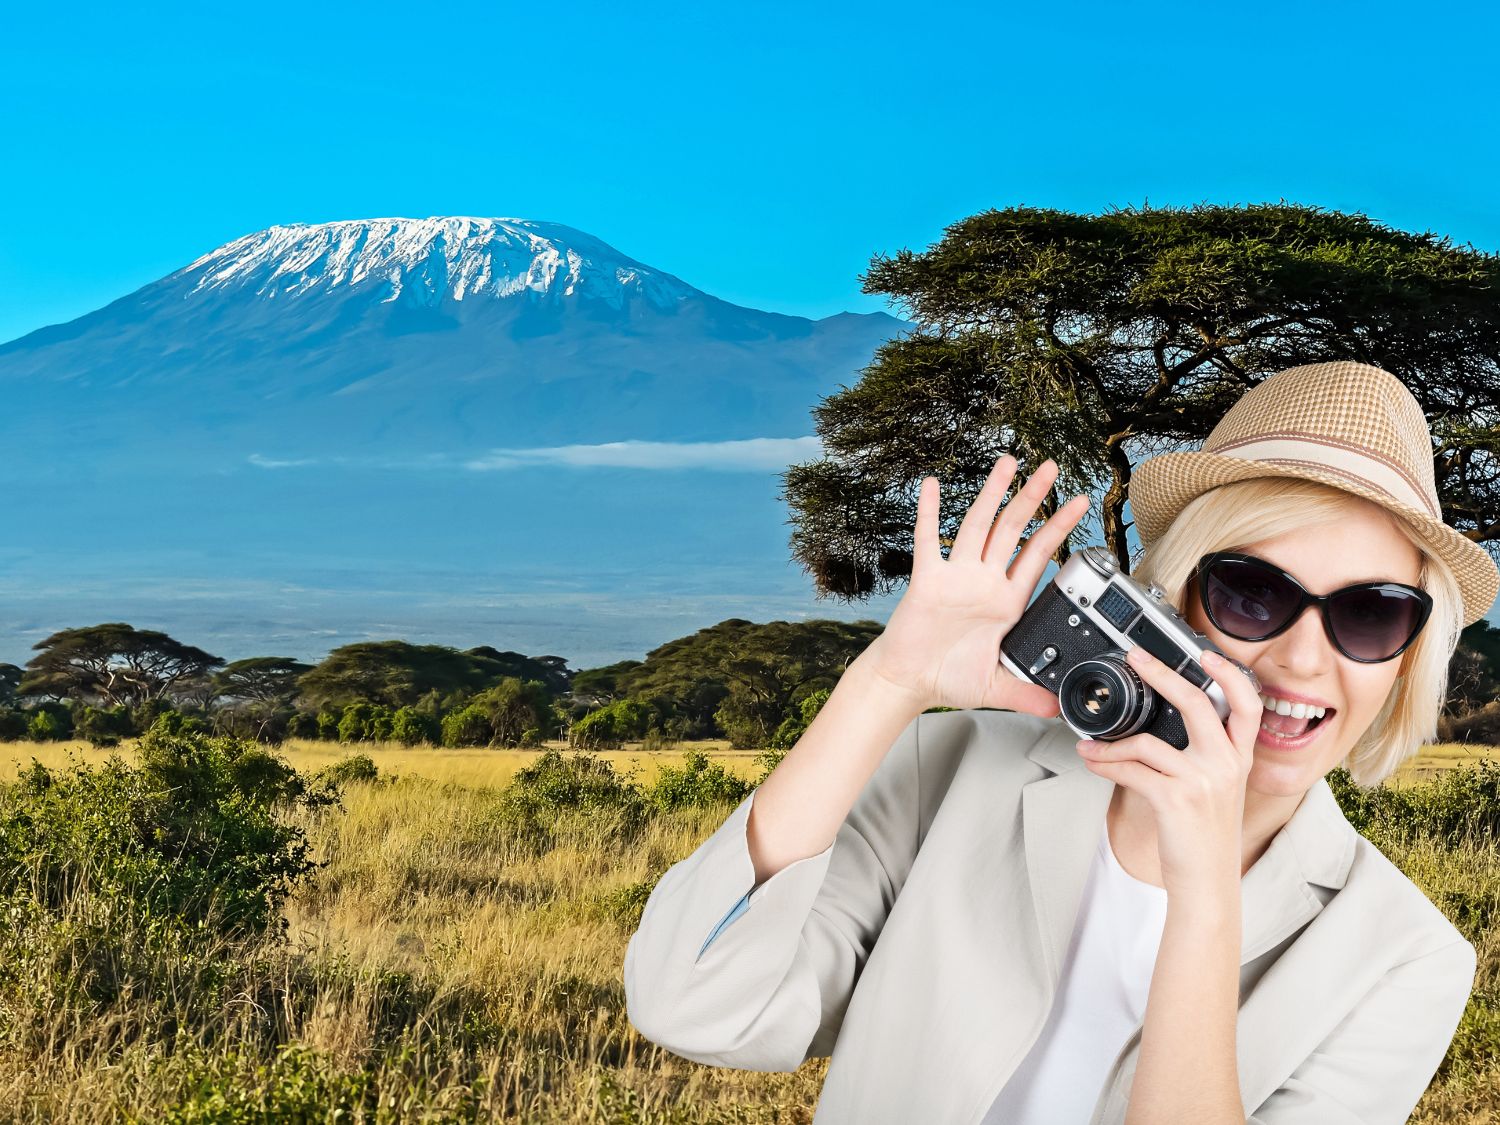 The 6 Best Kenya Tours For Unforgettable Adventures That Are Achievable & Affordable